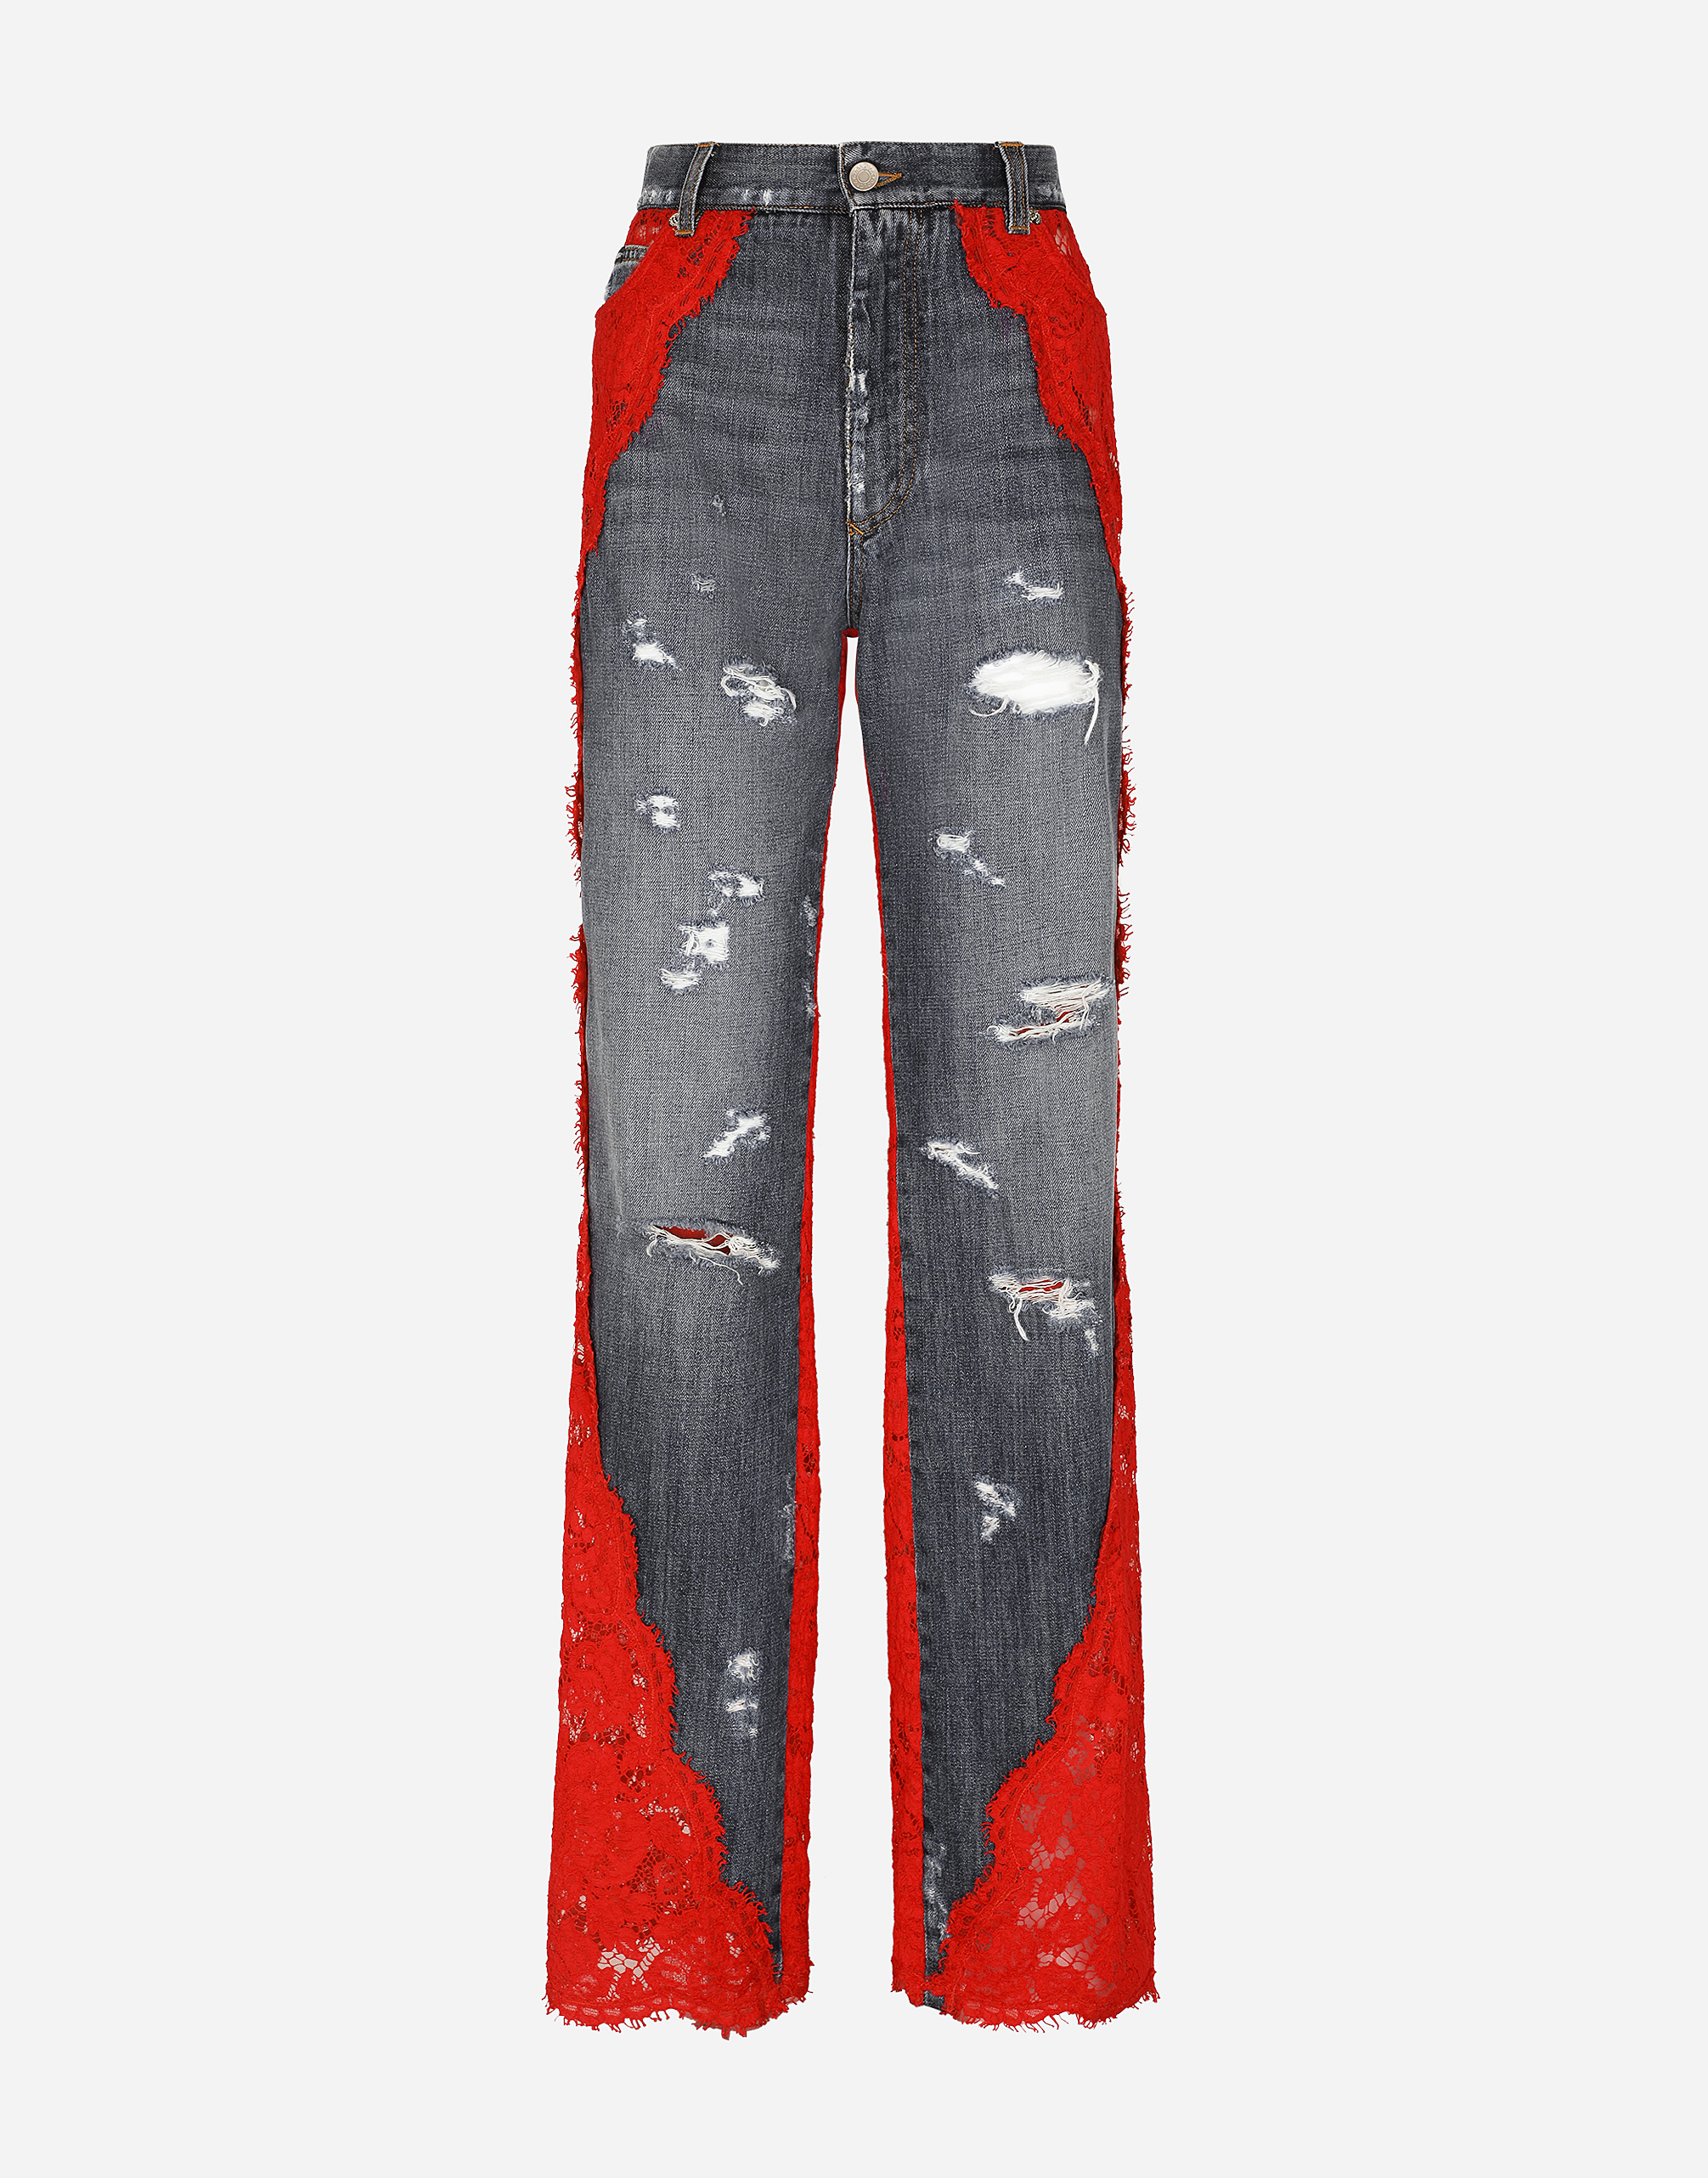 Denim jeans with lace details in Multicolor